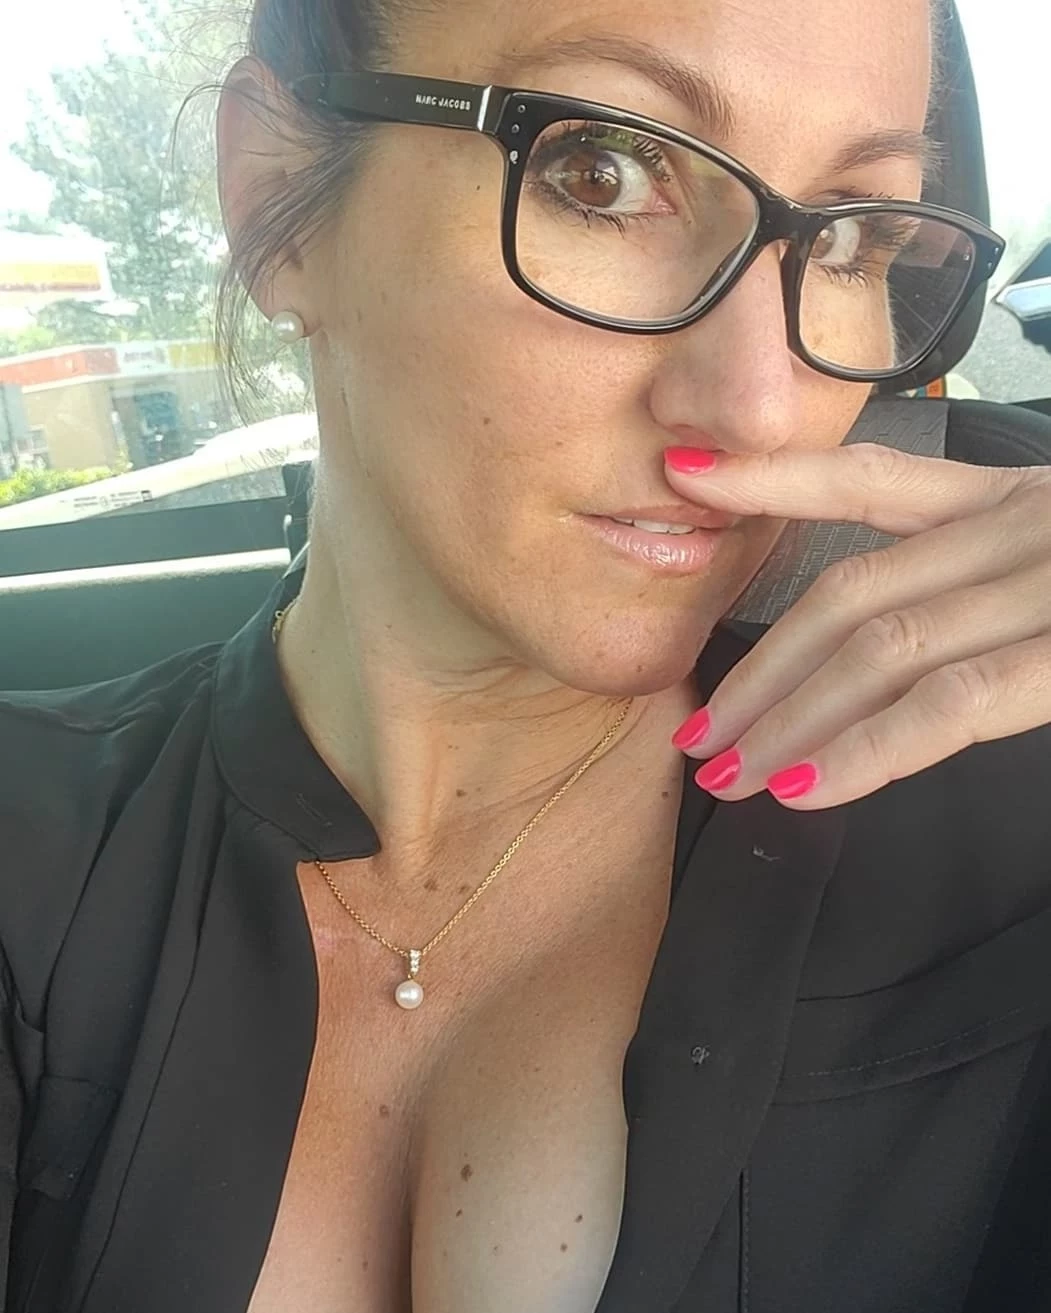 Real MILF'S don't use filters! (f,49)